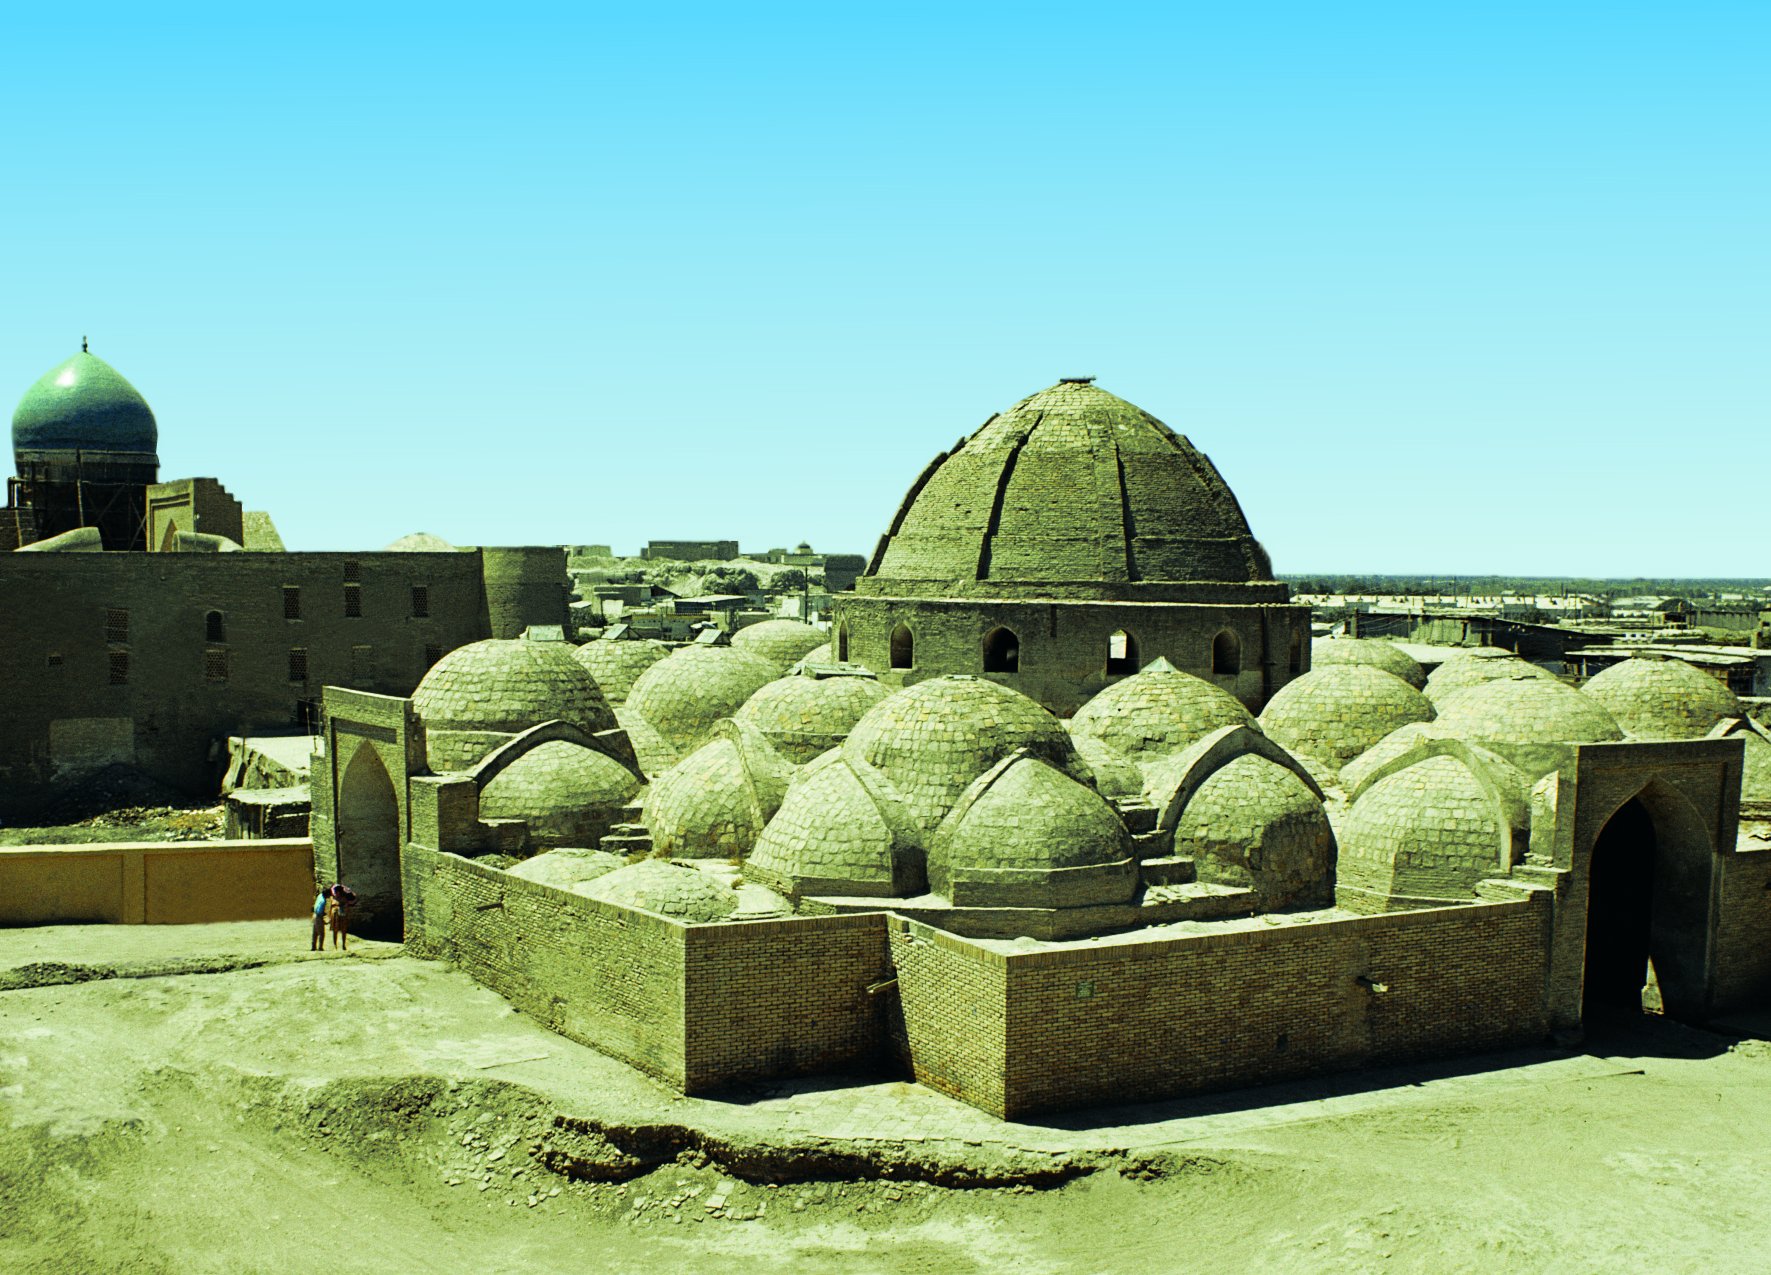 Trading Domes in Bukhara